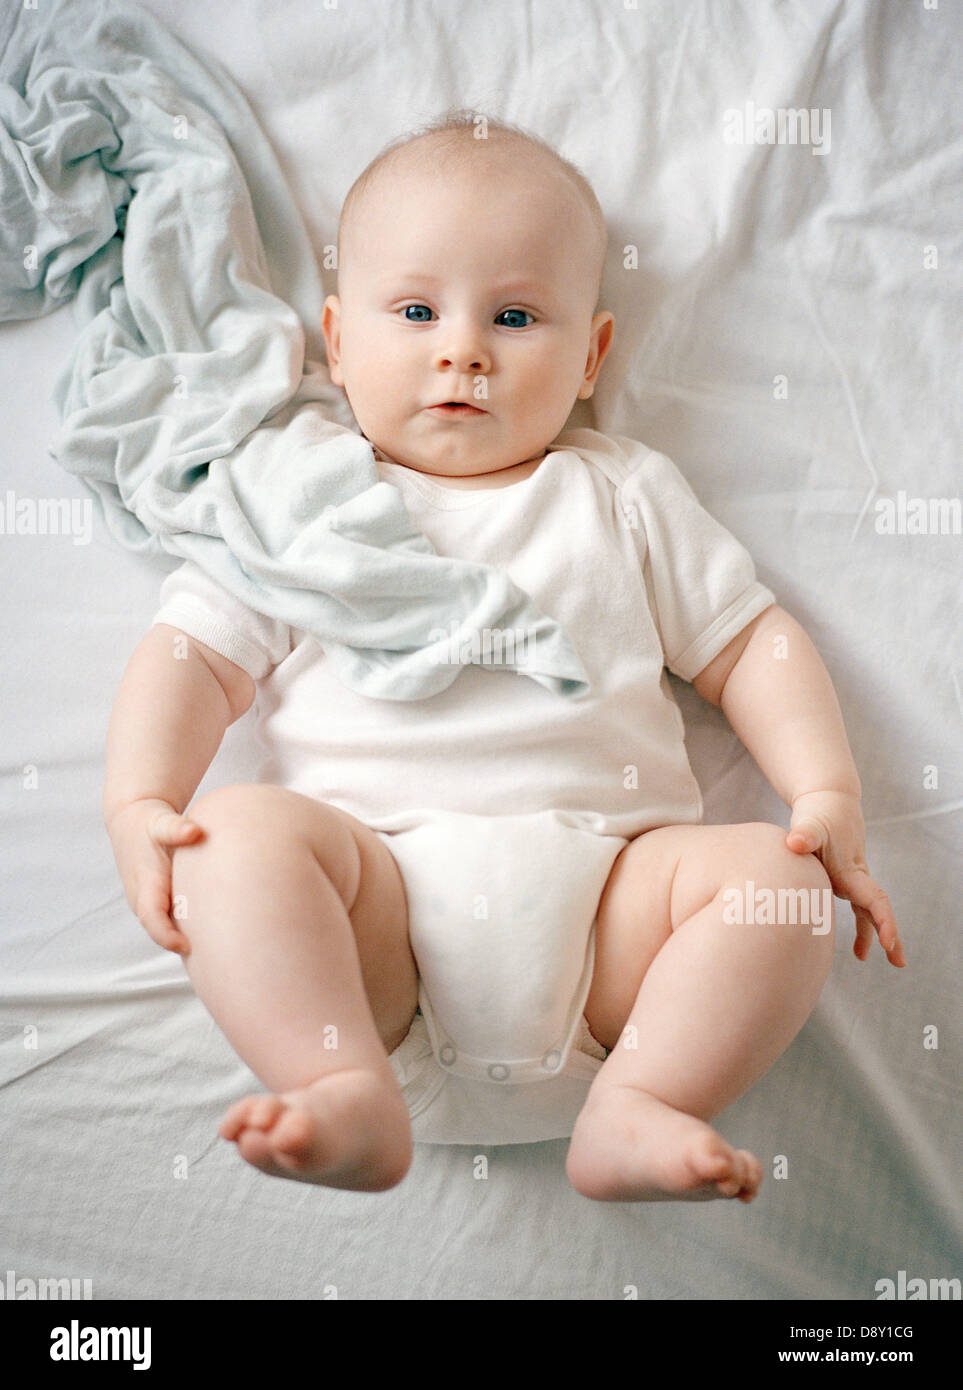 Baby in white clothes lying on whit bed. Stock Photo